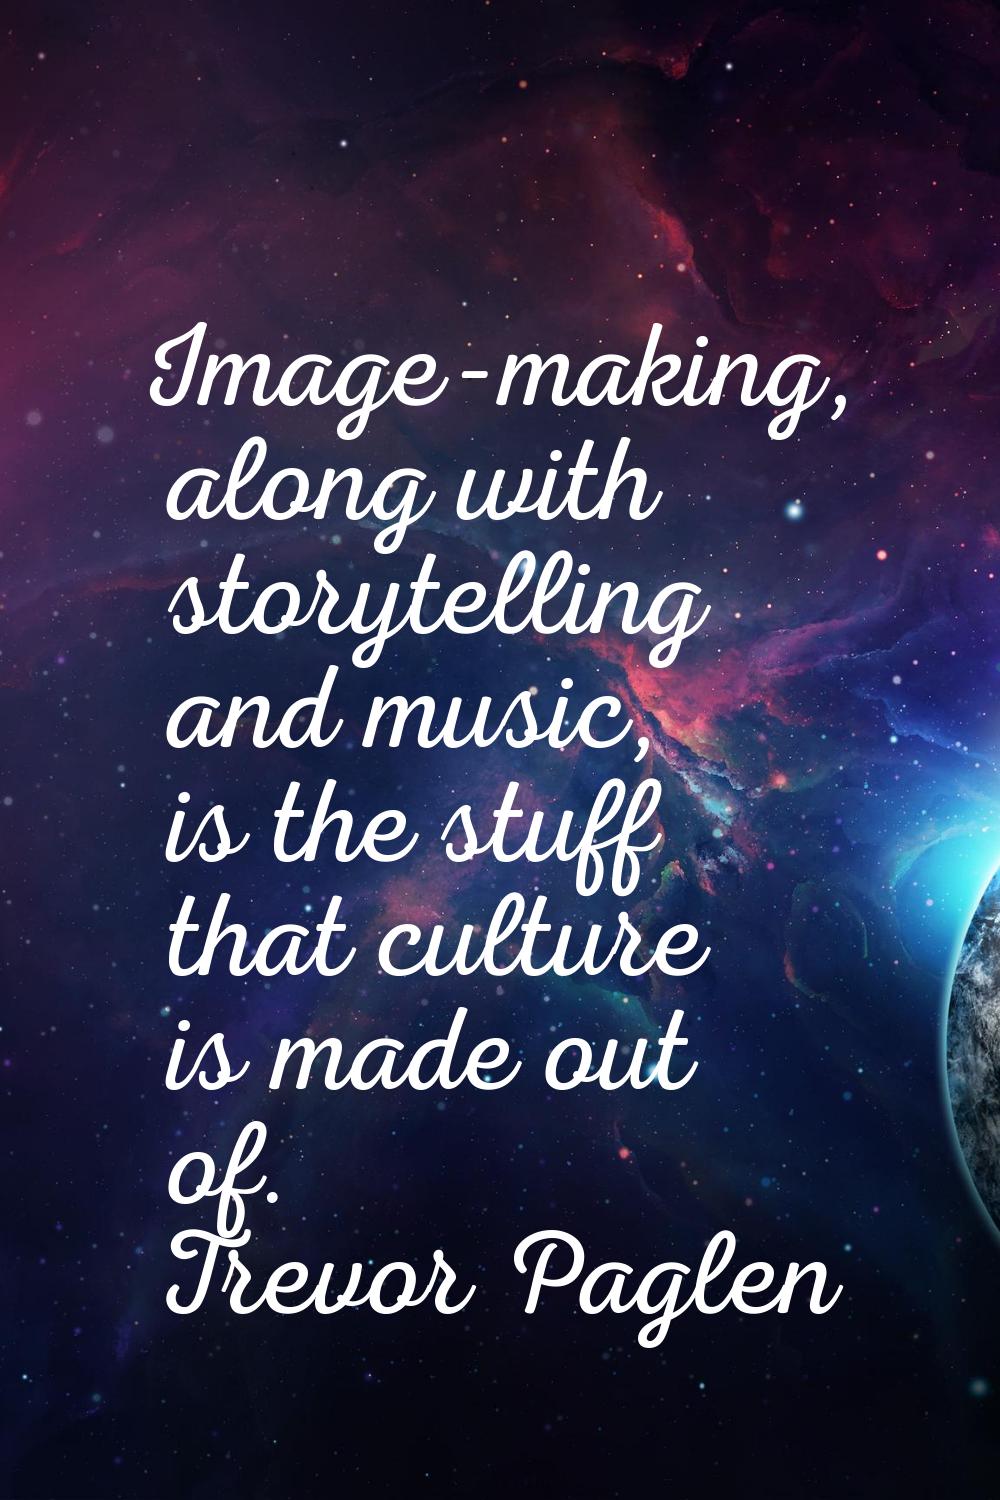 Image-making, along with storytelling and music, is the stuff that culture is made out of.